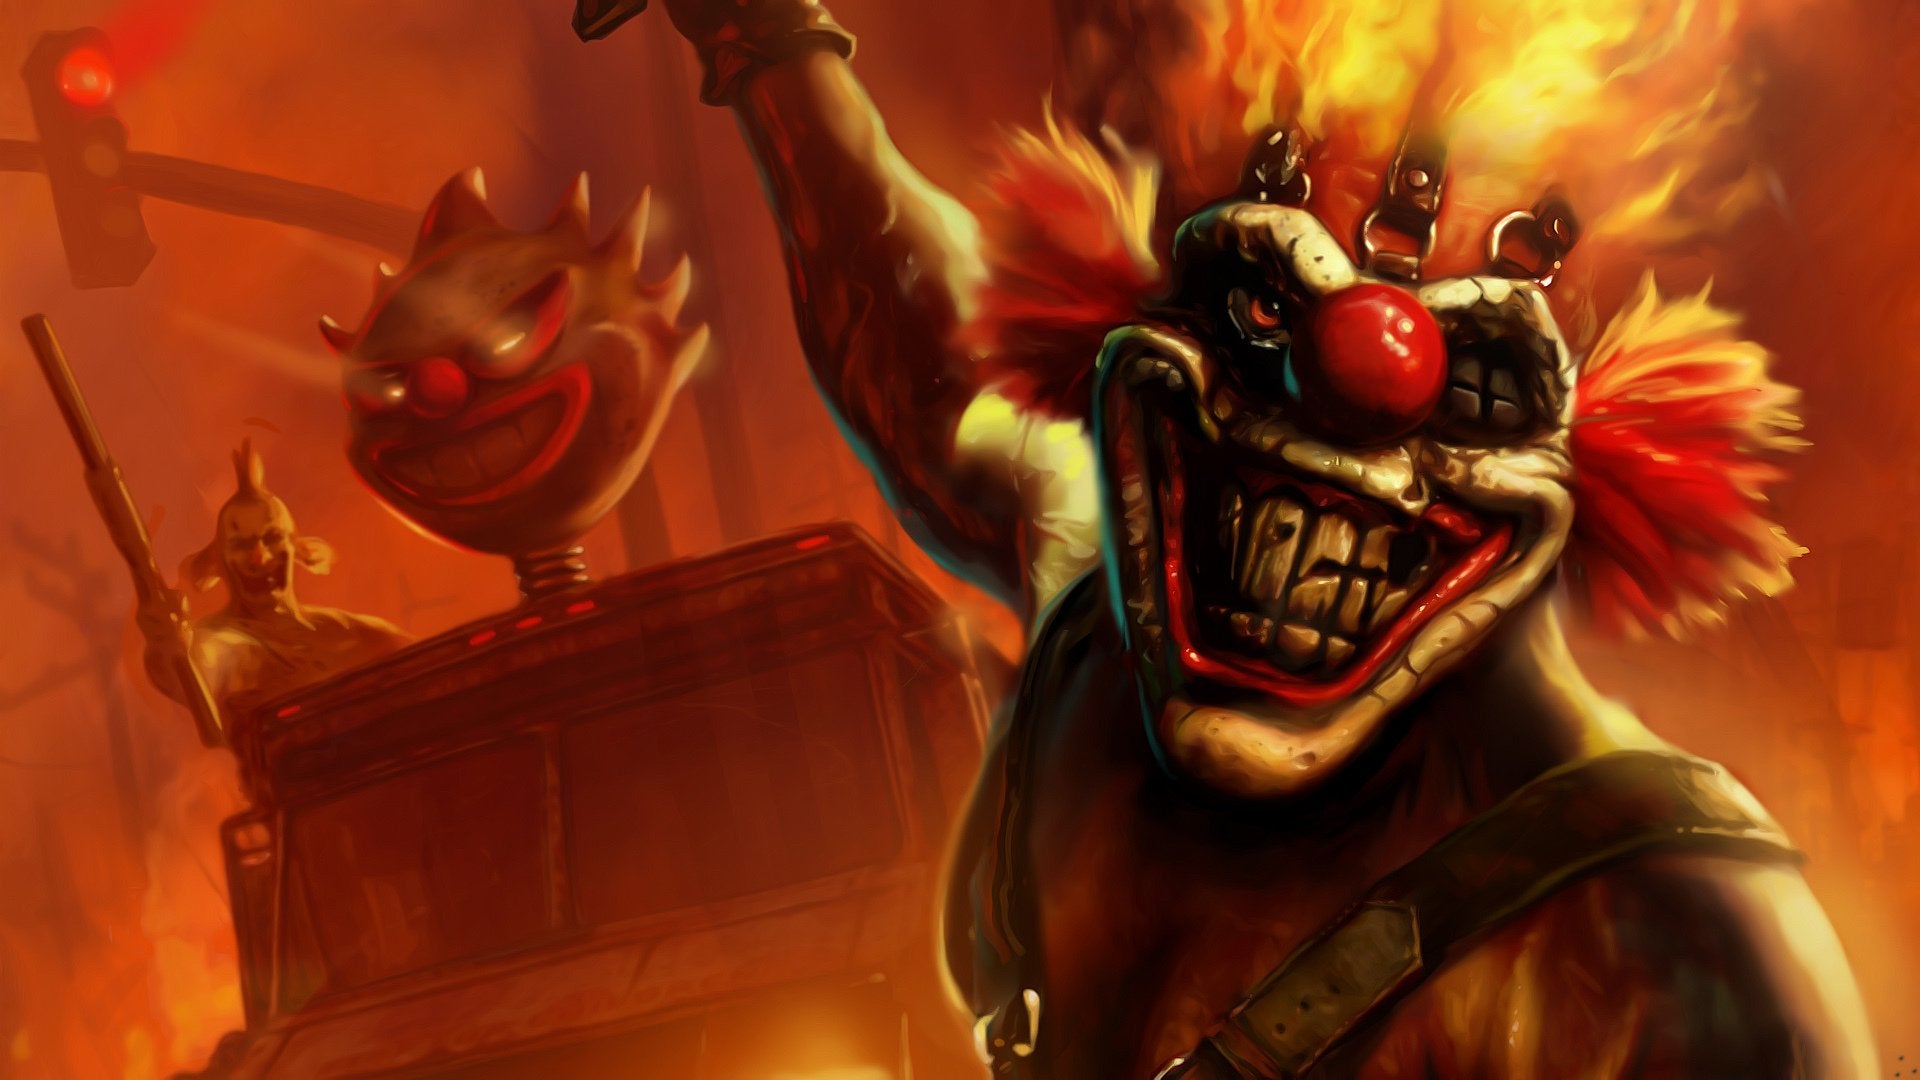 Image for Twisted Metal PS5 in development at Destruction AllStars studio – report